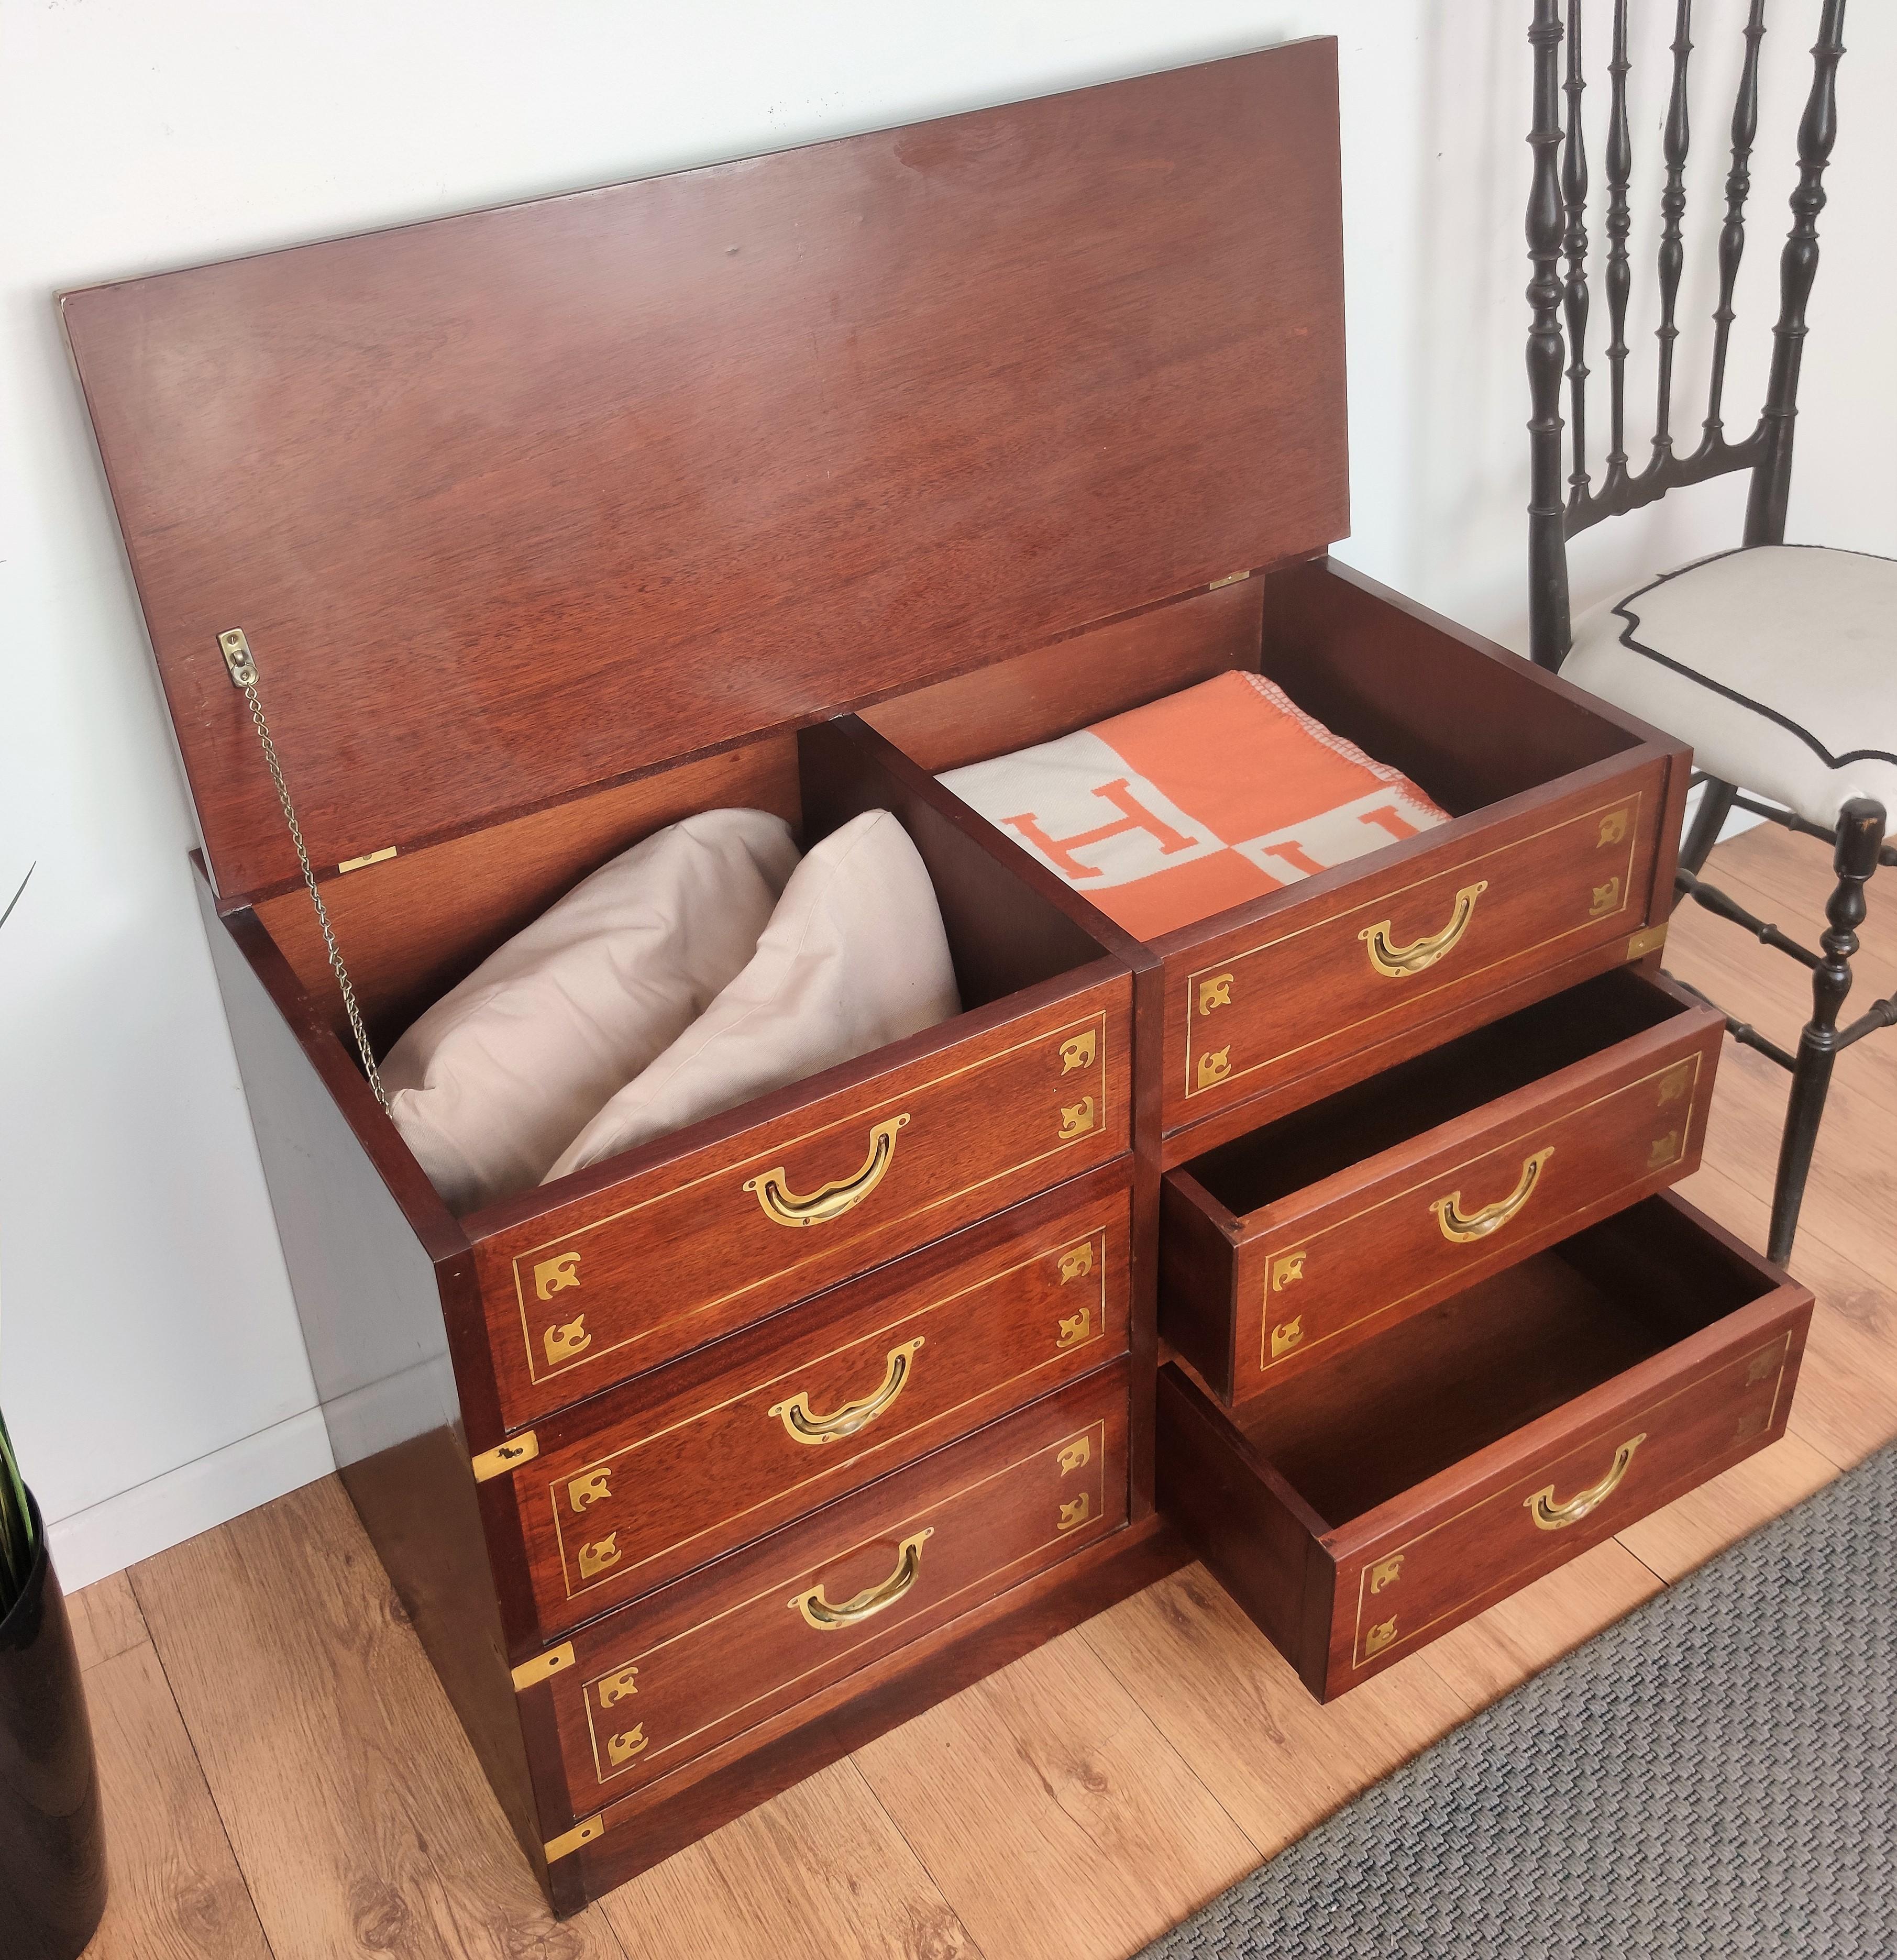 A vintage marine military campaign chest from the late 20th century, with six drawers and brass hardware. Created during the late midcentury modern period it is inspired by the typical campaign military style from 19th army chests. Its